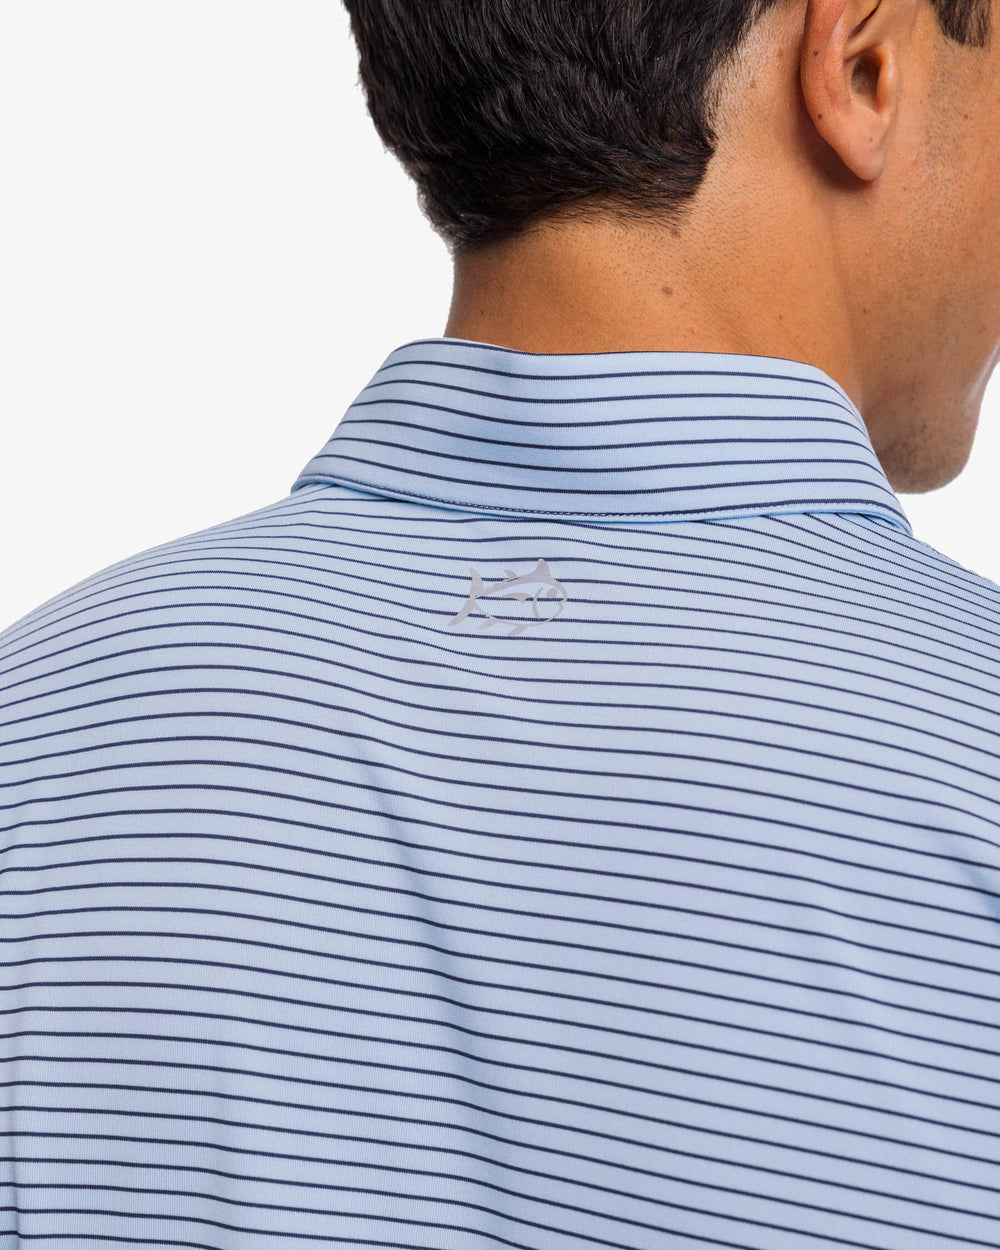 The yoke view of the Southern Tide Driver Mayfair Performance Polo Shirt by Southern Tide - Rain Water